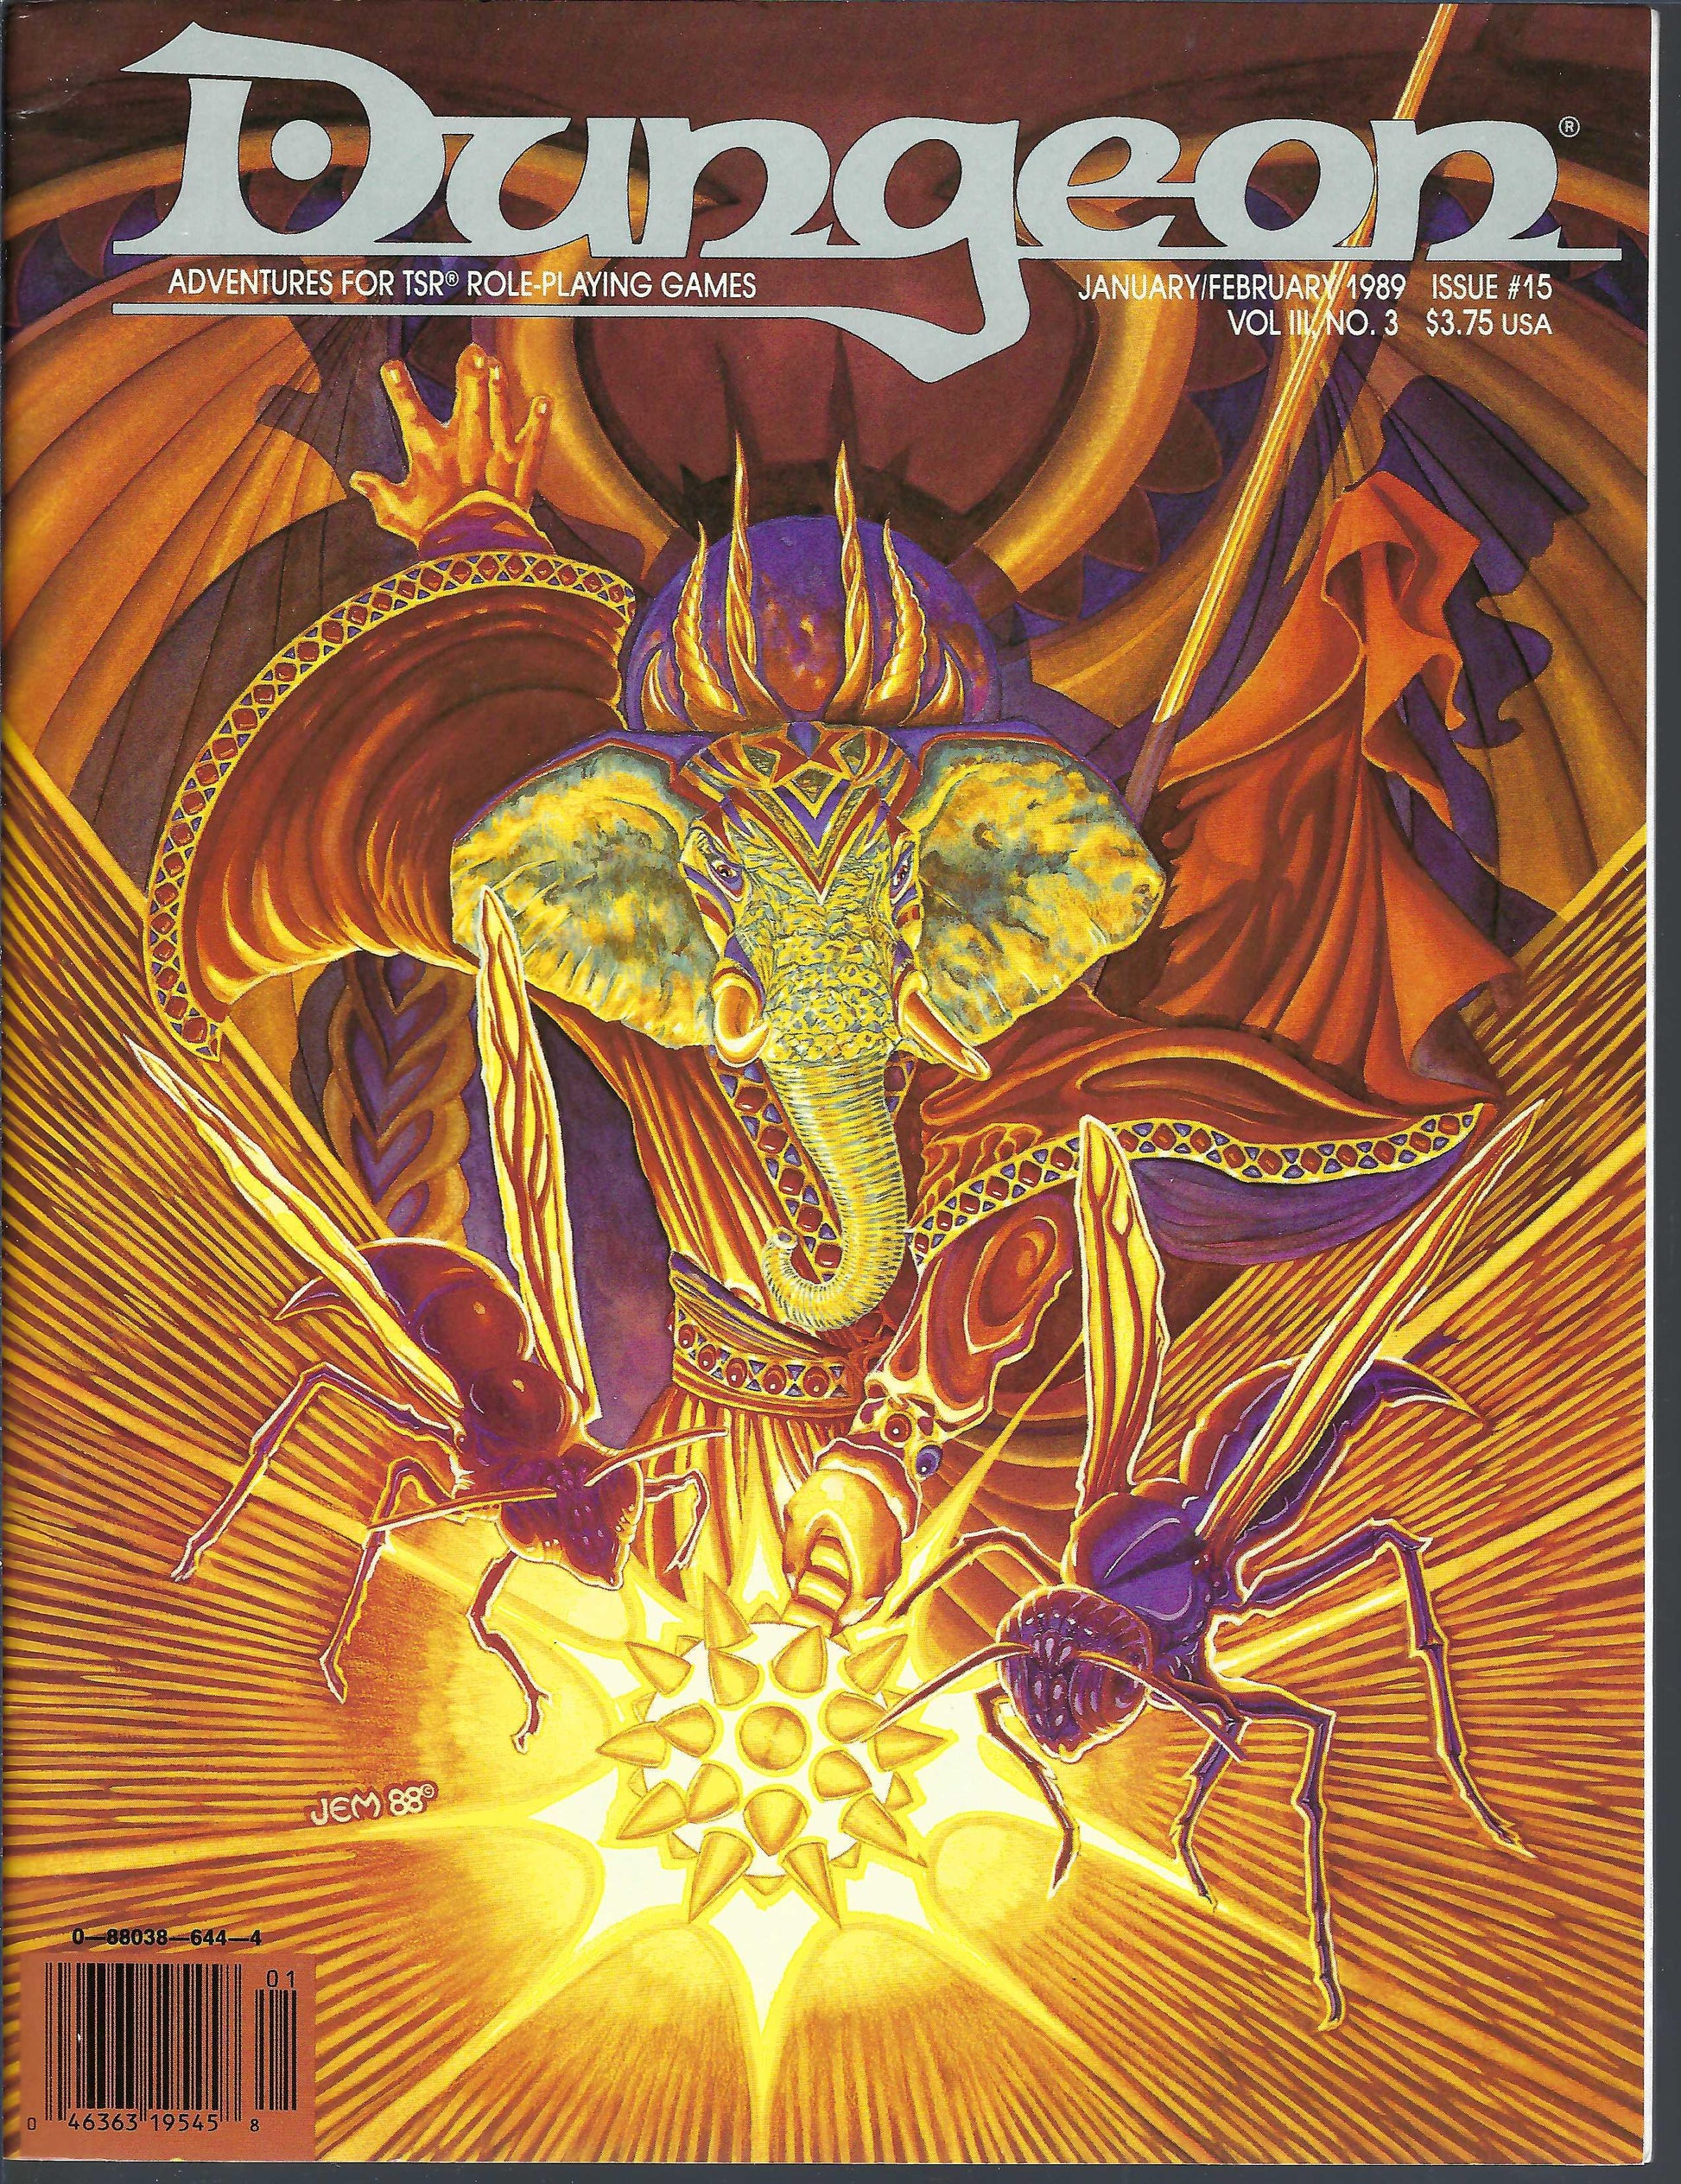 Dungeon Magazine issue 15 front cover